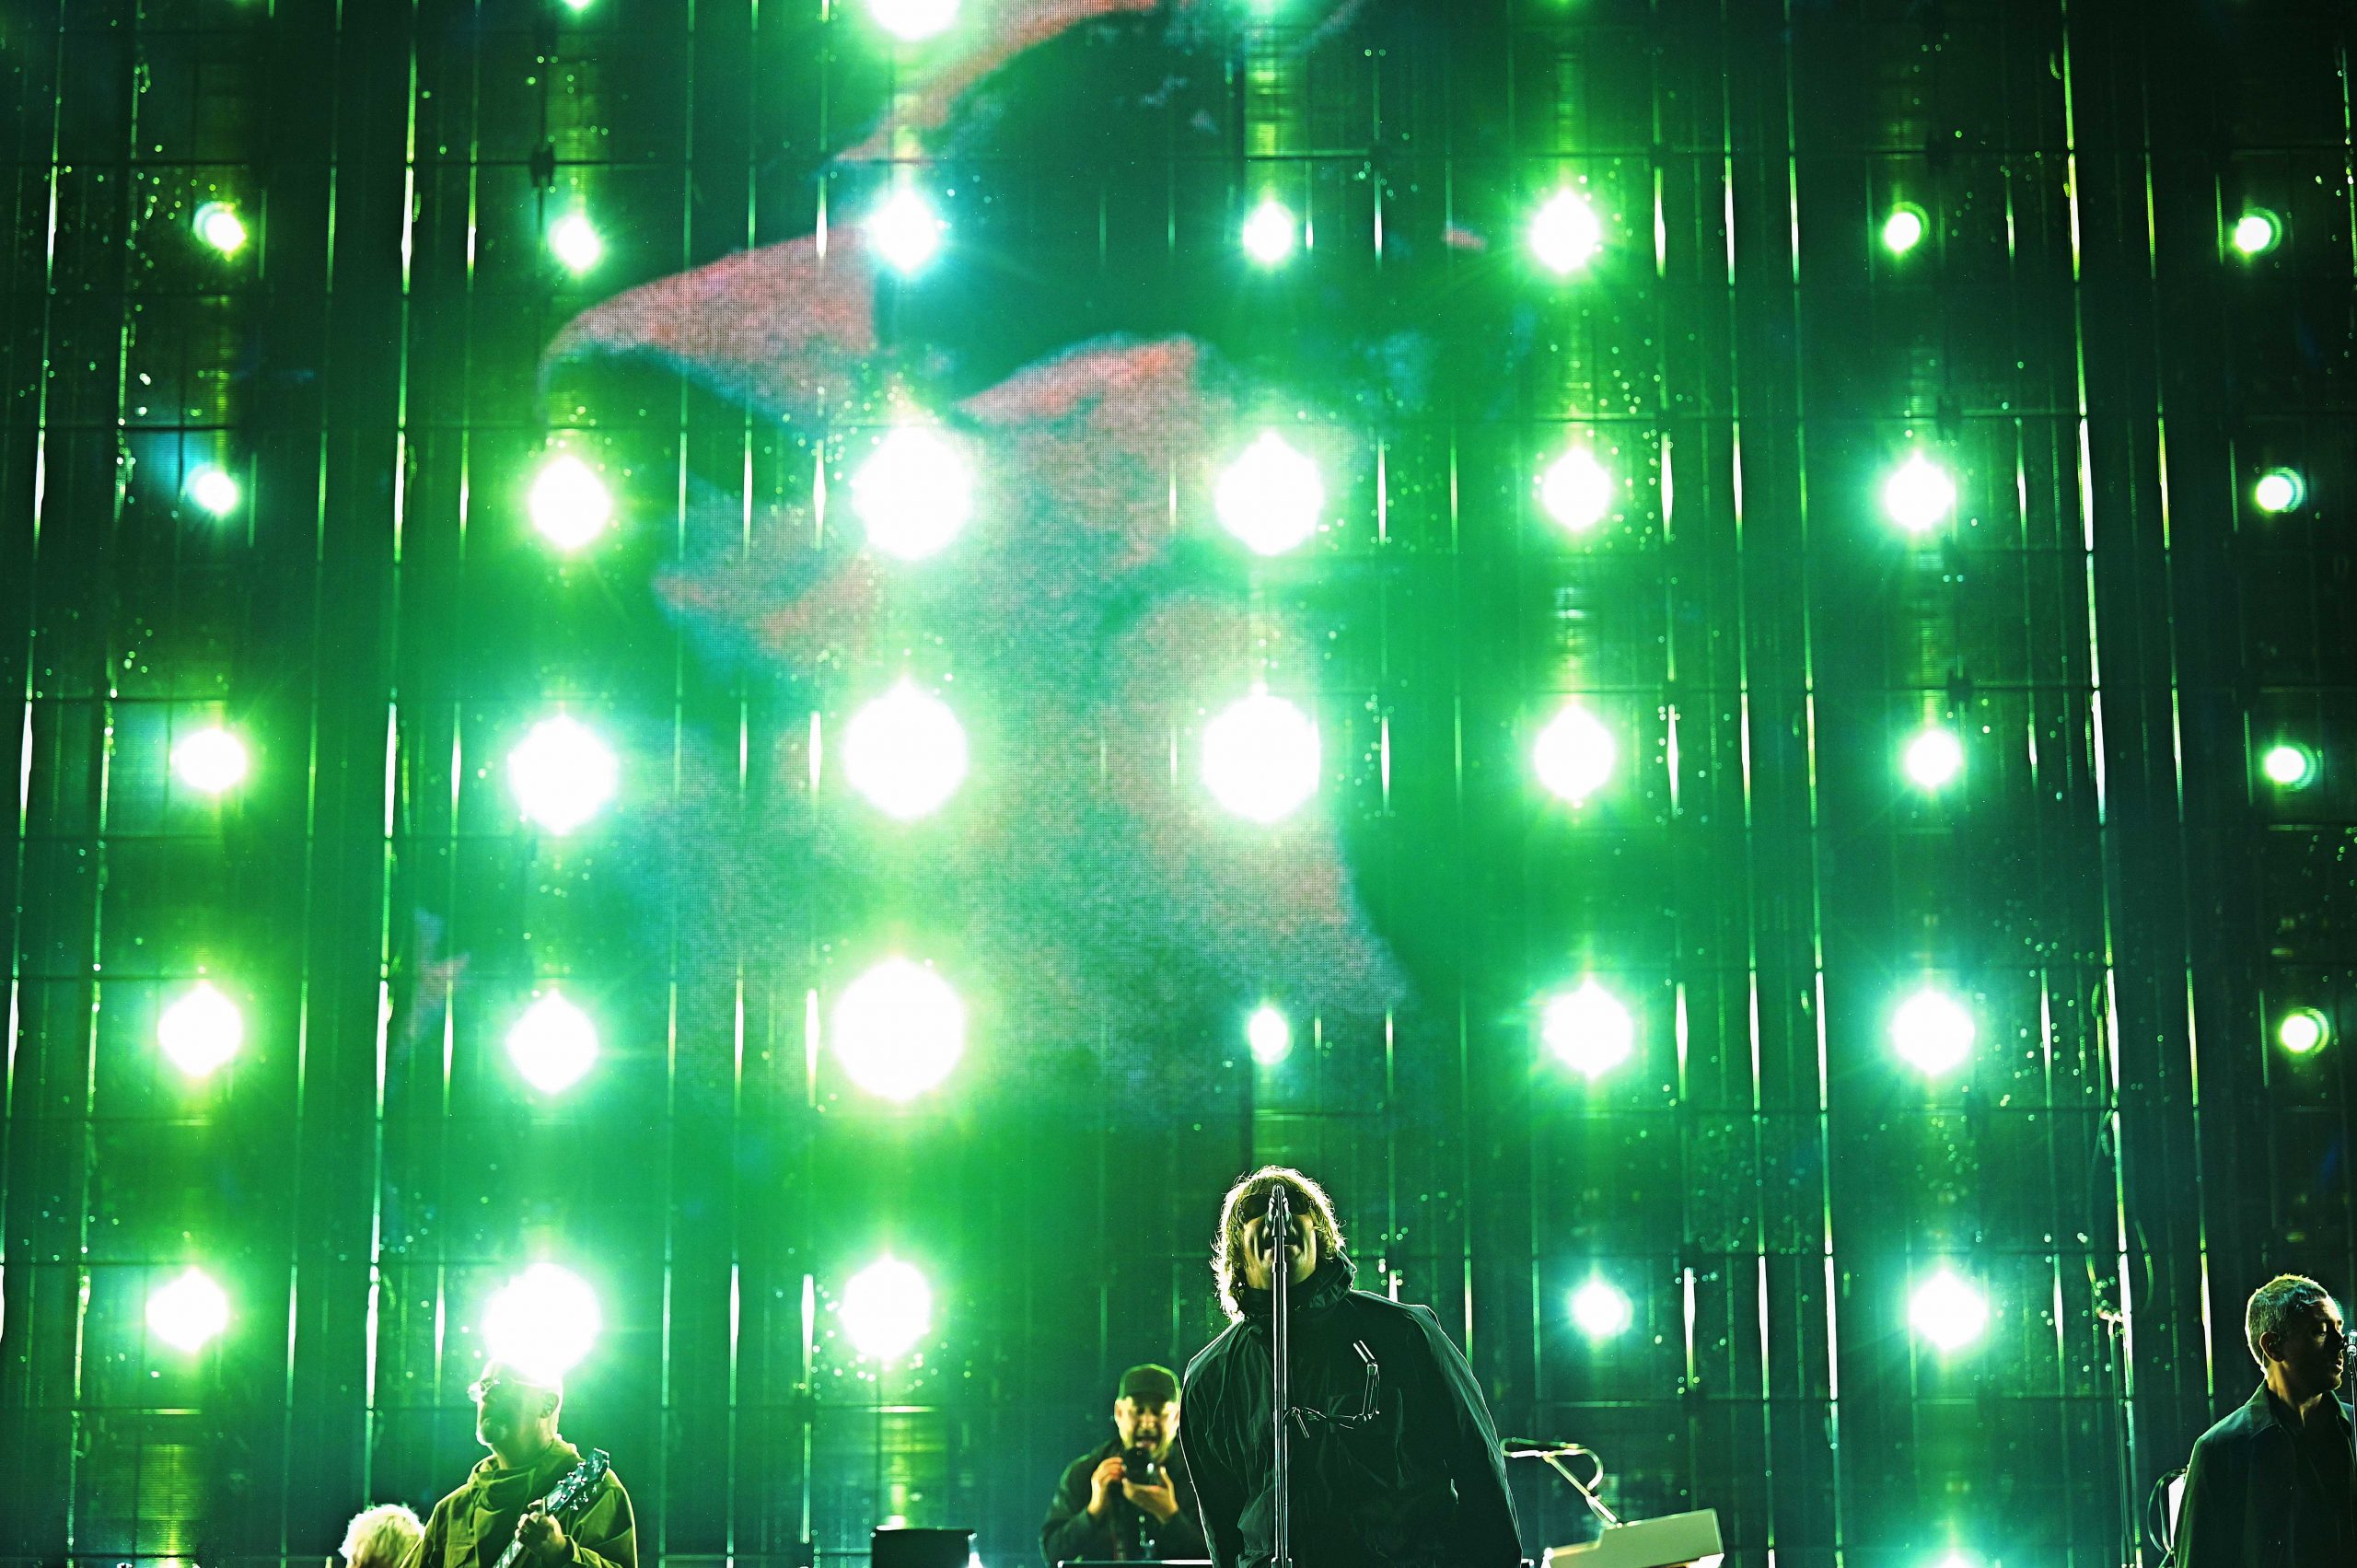 Liam Gallagher performing